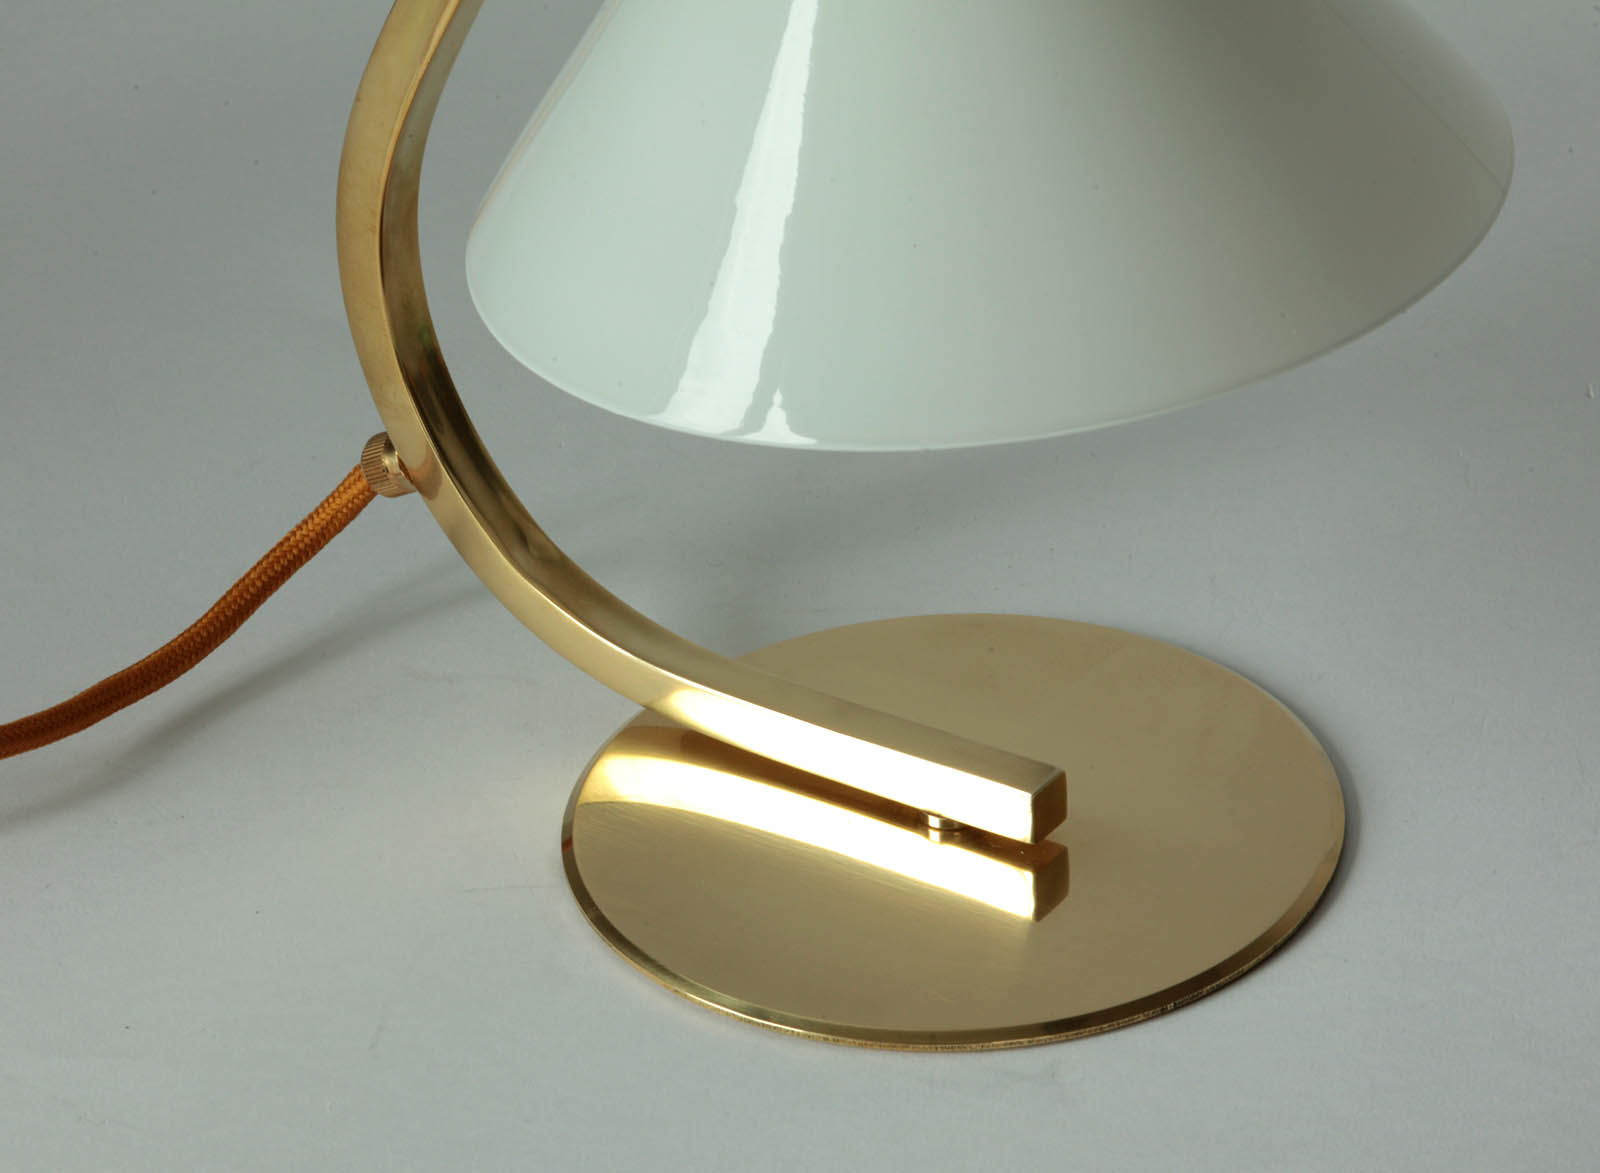 Small Table Lamp Made of Brass With Cone Shaped Shade: Messing poliert, unlackiert mit weiß glänzendem Glas